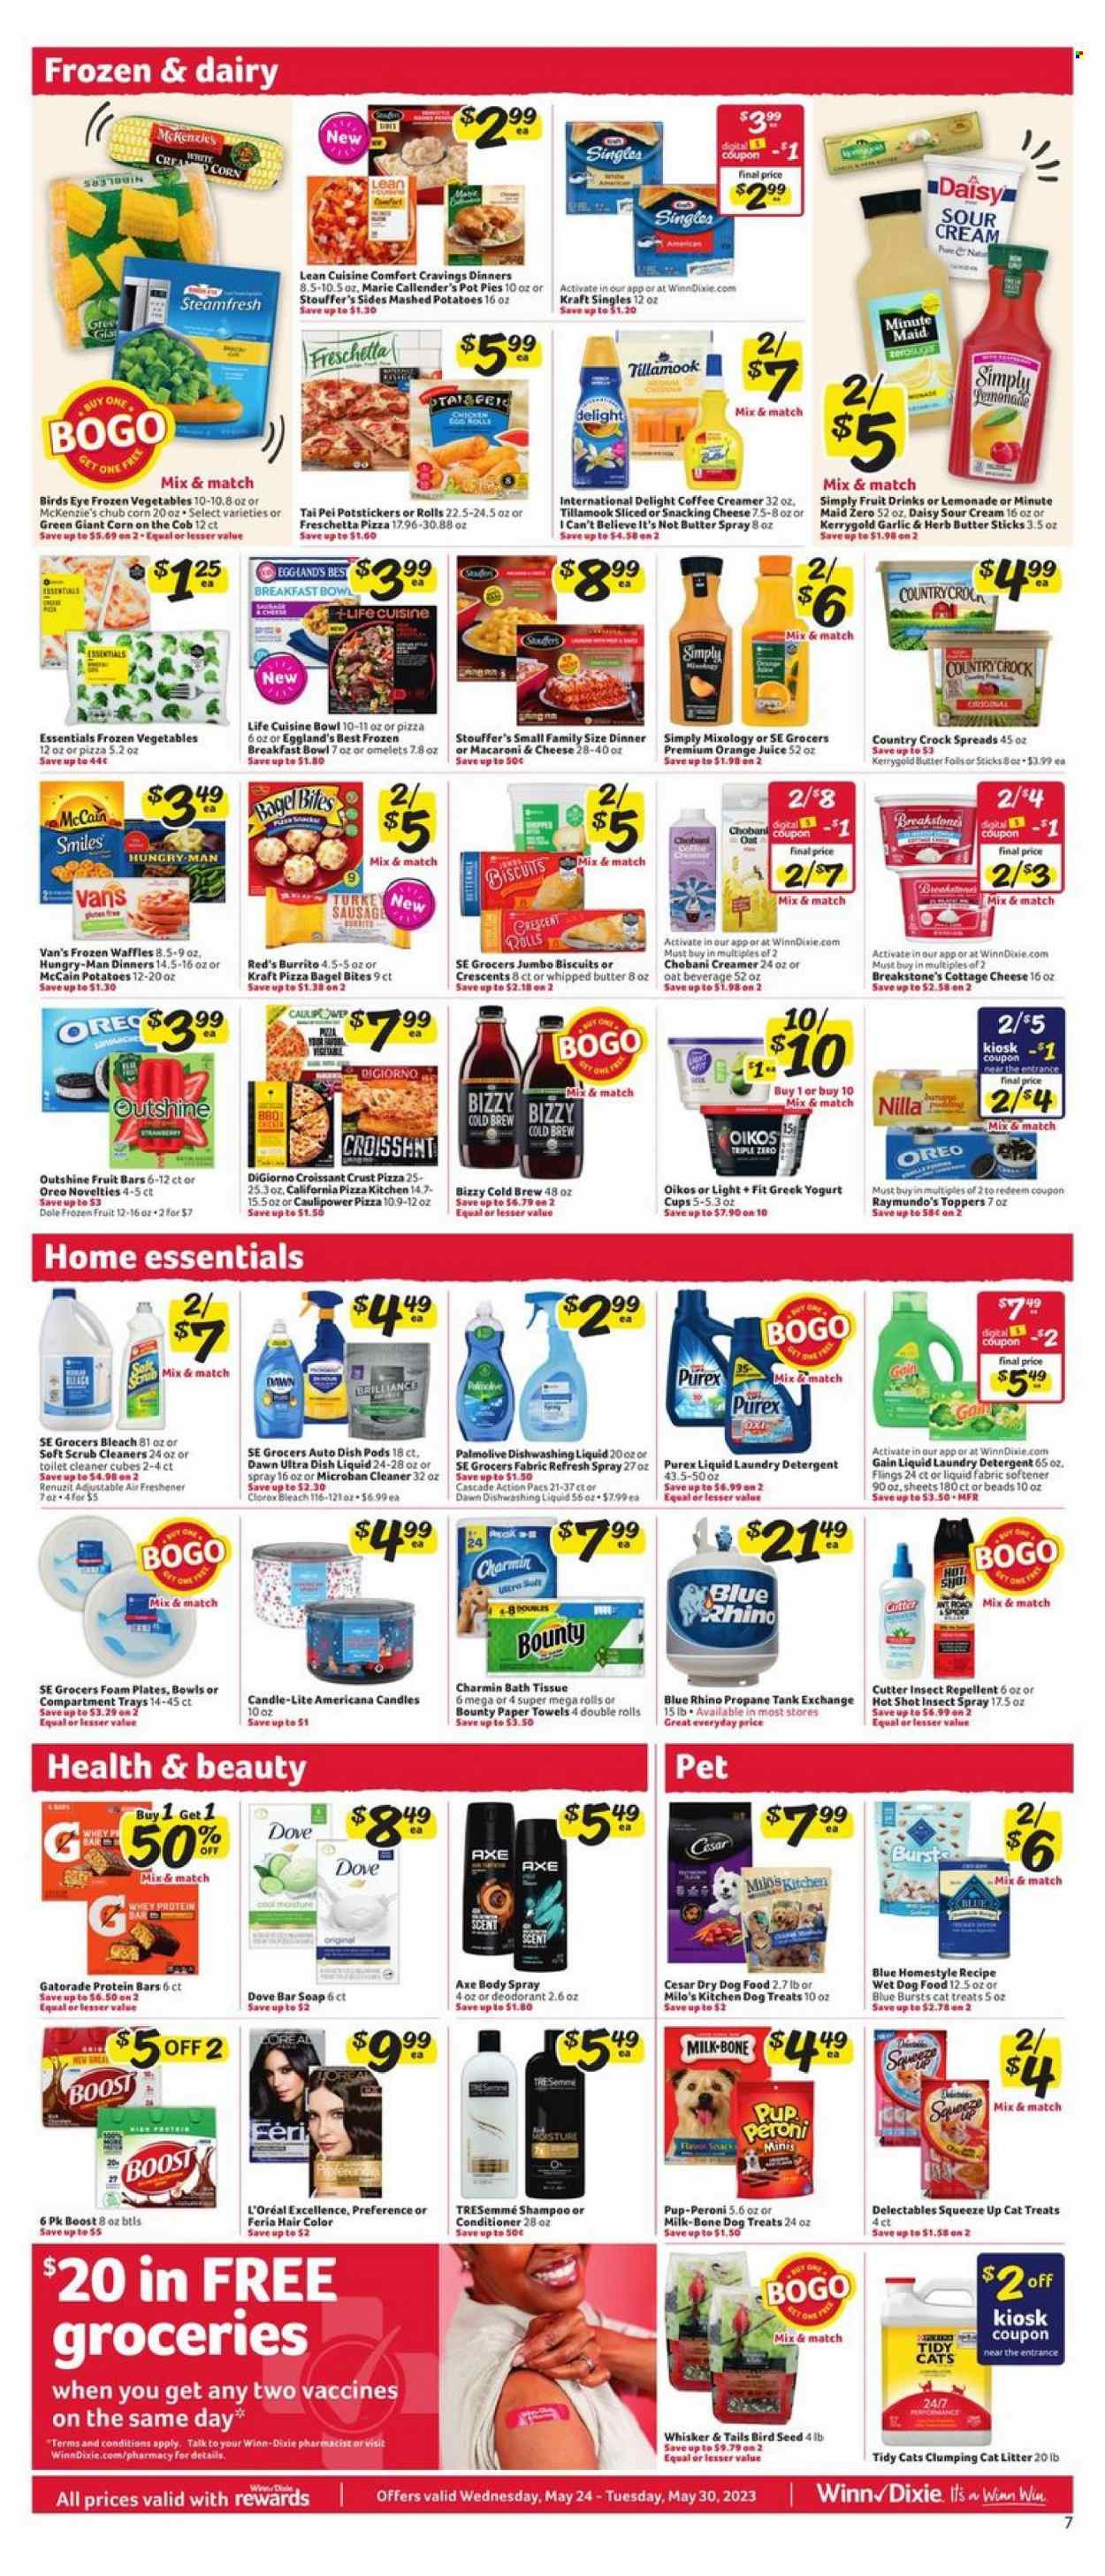 thumbnail - Winn Dixie Flyer - 05/24/2023 - 05/30/2023 - Sales products - bagels, crescent rolls, pot pie, waffles, corn, Dole, macaroni & cheese, mashed potatoes, pizza, breakfast bowl, Bird's Eye, burrito, Lean Cuisine, Marie Callender's, Kraft®, snack, sausage, cottage cheese, sandwich slices, Kraft Singles, greek yoghurt, Oreo, yoghurt, Oikos, Chobani, milk, eggs, whipped butter, I Can't Believe It's Not Butter, sour cream, creamer, fruit bar, frozen vegetables, Stouffer's, McCain, Dove, Bounty, biscuit, oats, protein bar, lemonade, orange juice, juice, Gatorade, fruit punch, Boost, beer, chicken, turkey, bath tissue, kitchen towels, paper towels, Charmin, detergent, Gain, cleaner, bleach, toilet cleaner, Clorox, Cascade, fabric softener, laundry detergent, Purex, dishwashing liquid, dishwasher tablets, shampoo, Palmolive, soap bar, soap, L’Oréal, conditioner, TRESemmé, hair color, body spray, anti-perspirant, deodorant, Axe, repellent, plate, cutter, candle, air freshener, foam plates, Dixie, animal food, cat litter, dry dog food, tank, bird food, dog food, wet dog food, Pup-Peroni, Rhino, whey protein, electrolyte drink. Page 7.